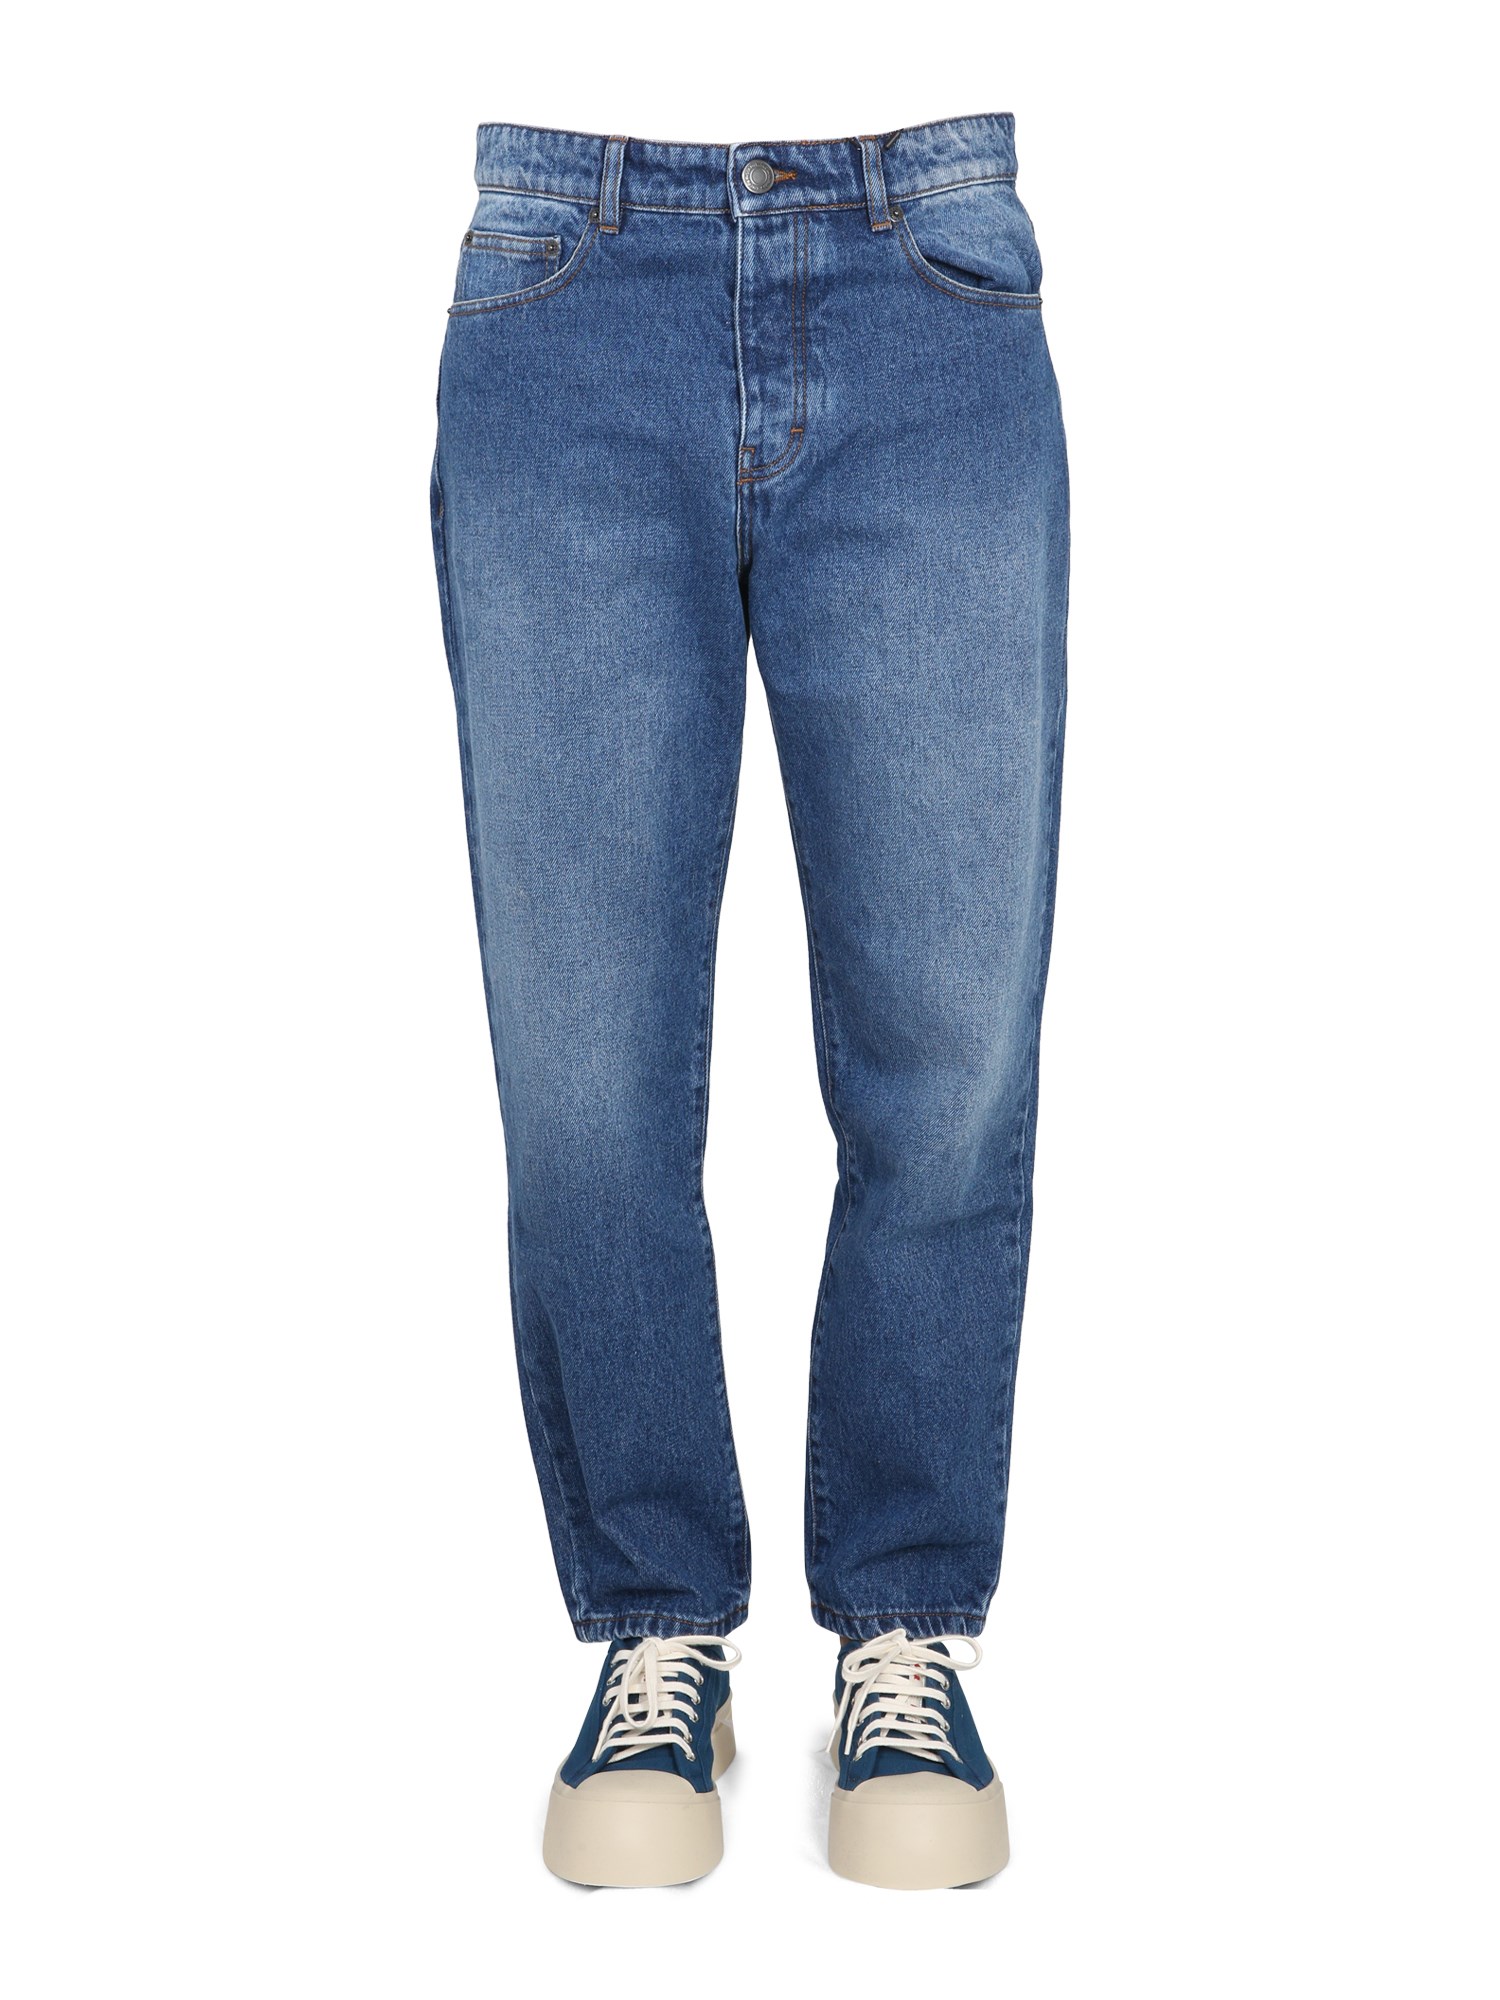 ami paris tapered fit jeans